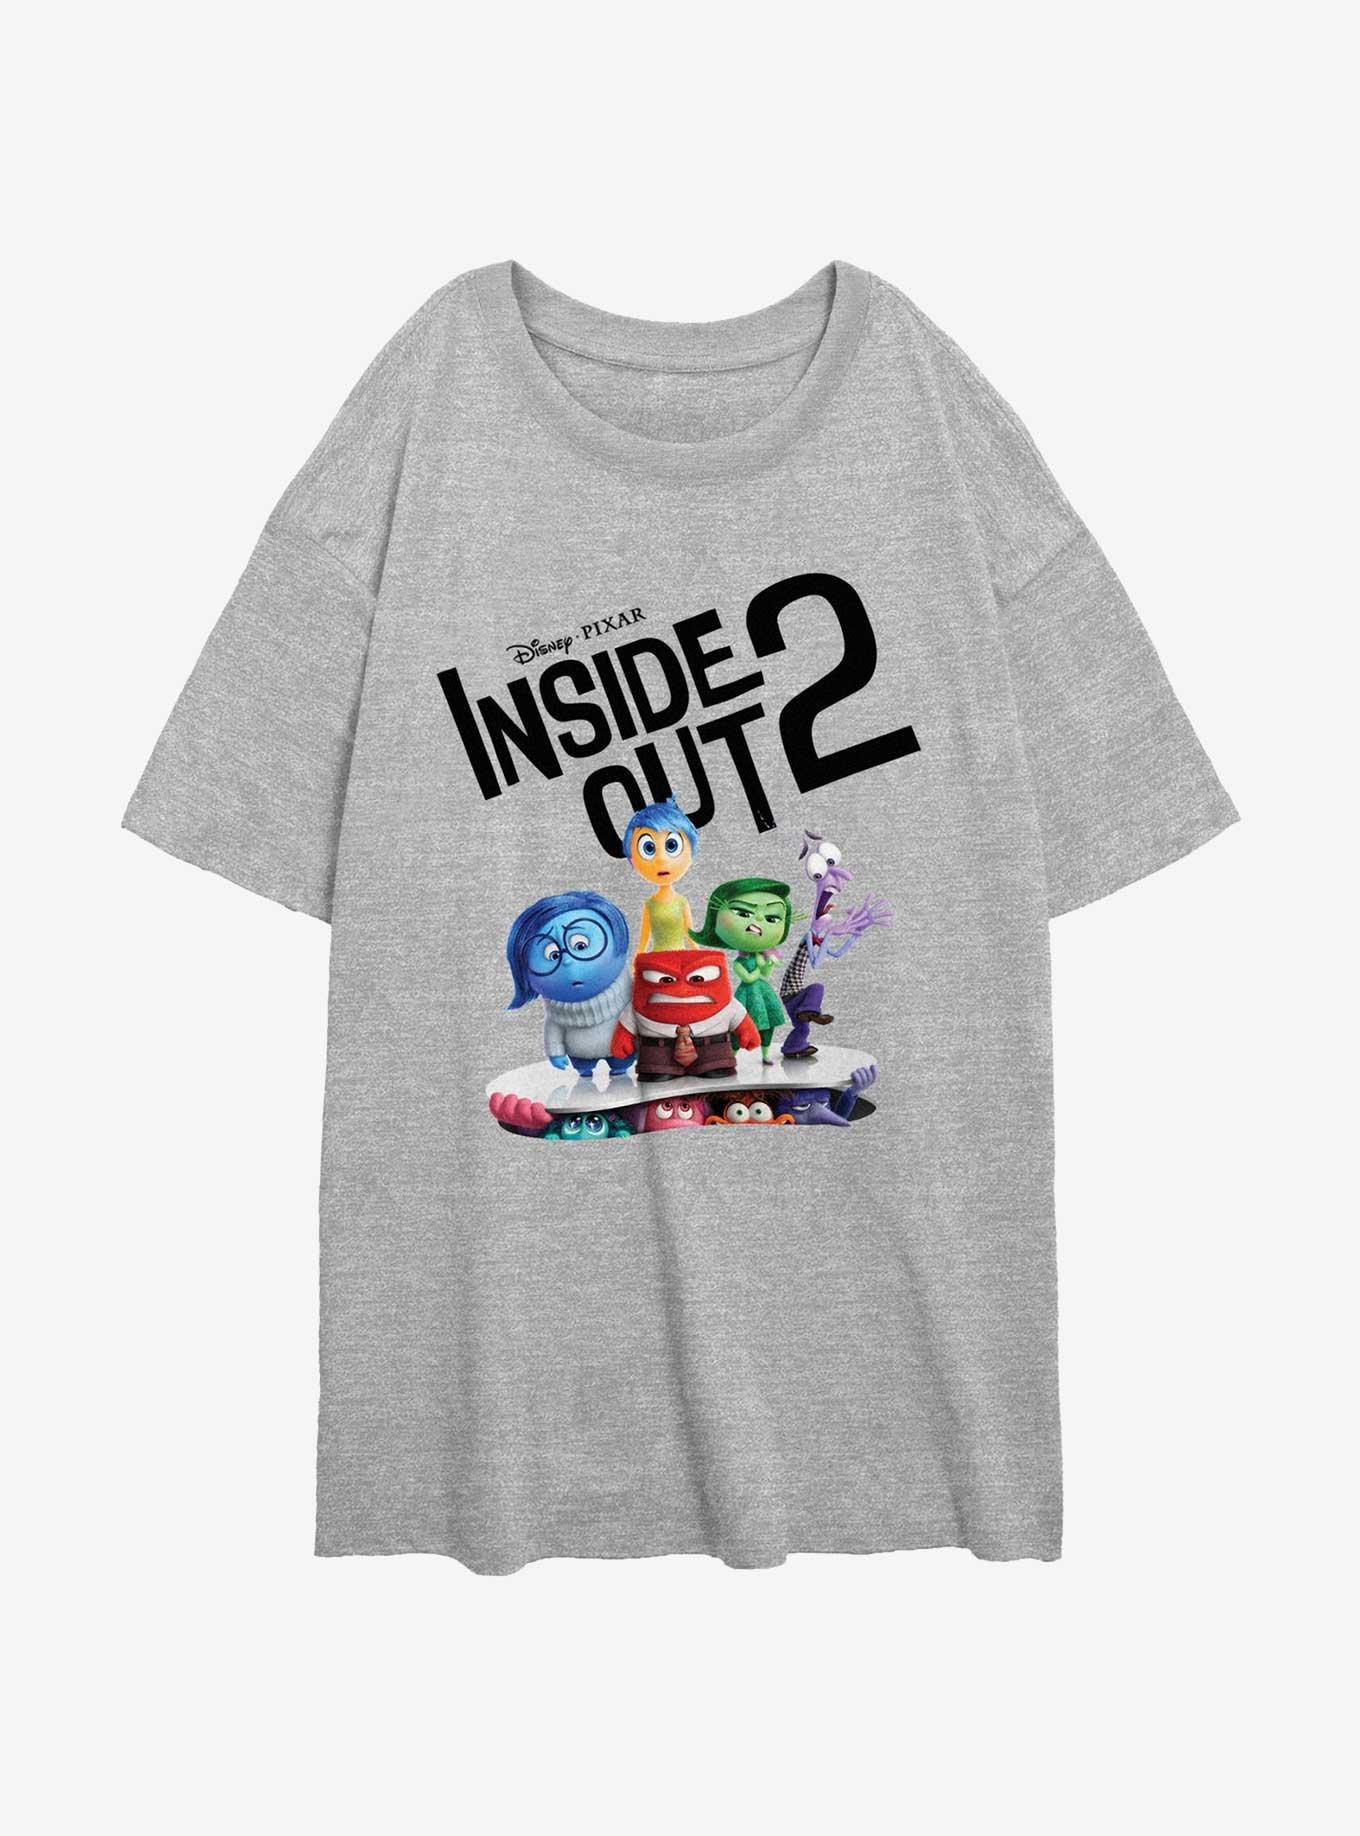 Disney Pixar Inside Out 2 Movie Poster Womens Oversized T-Shirt, ATH HTR, hi-res